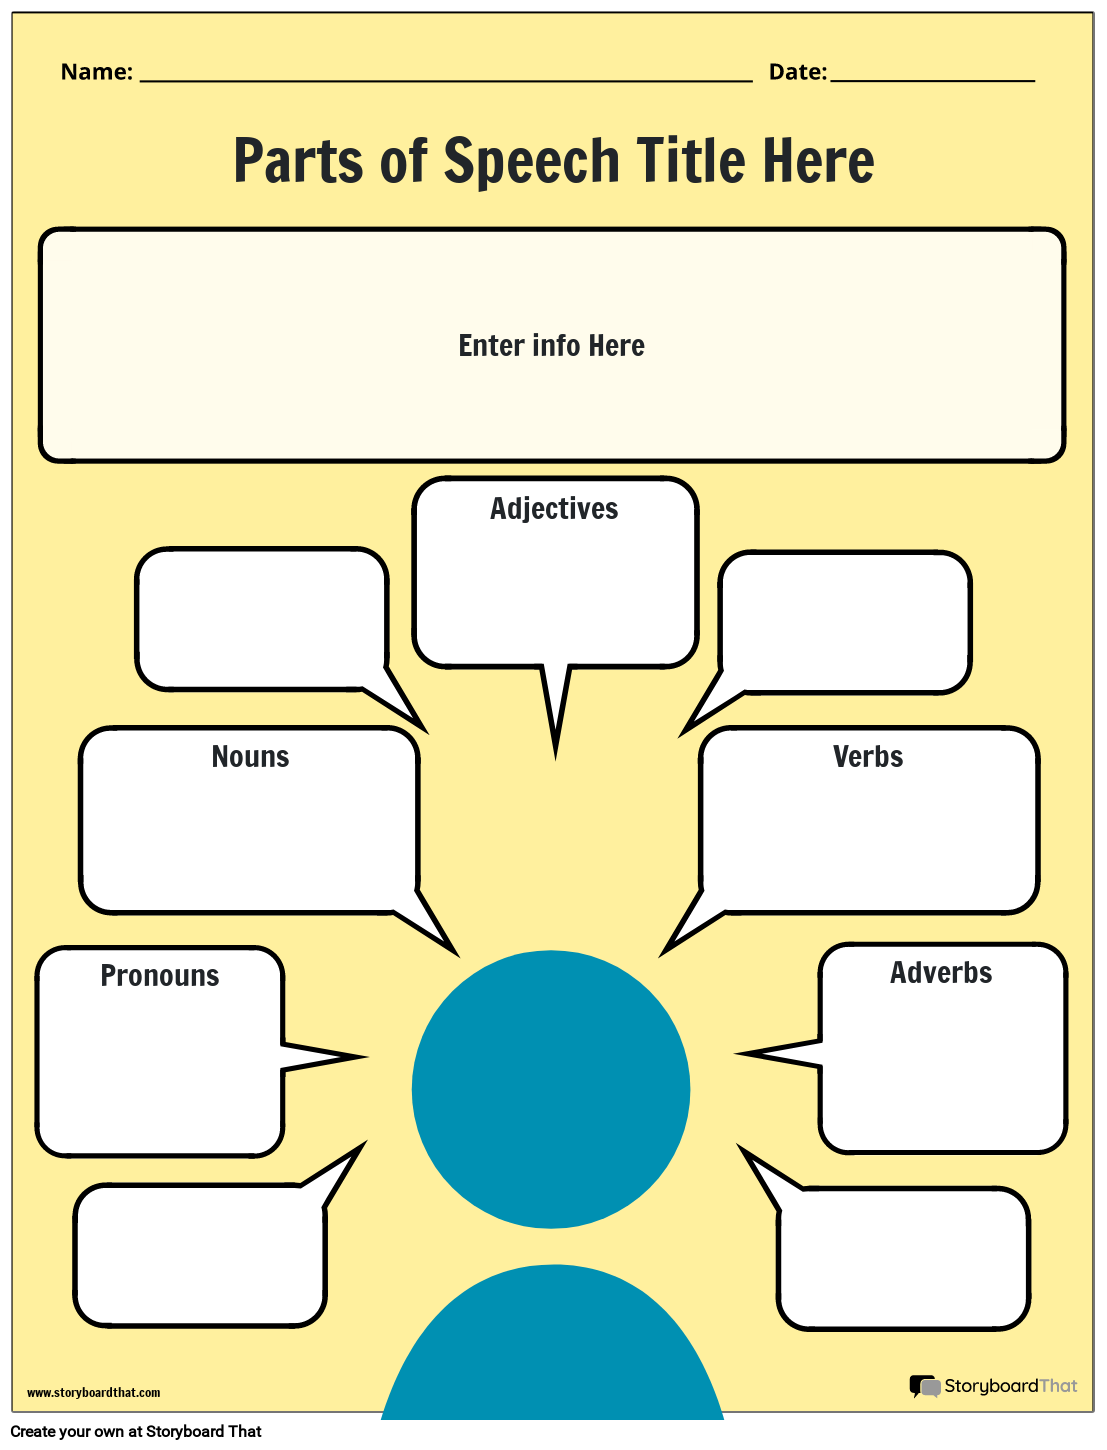 Types of Nouns, Parts of Speech Explained